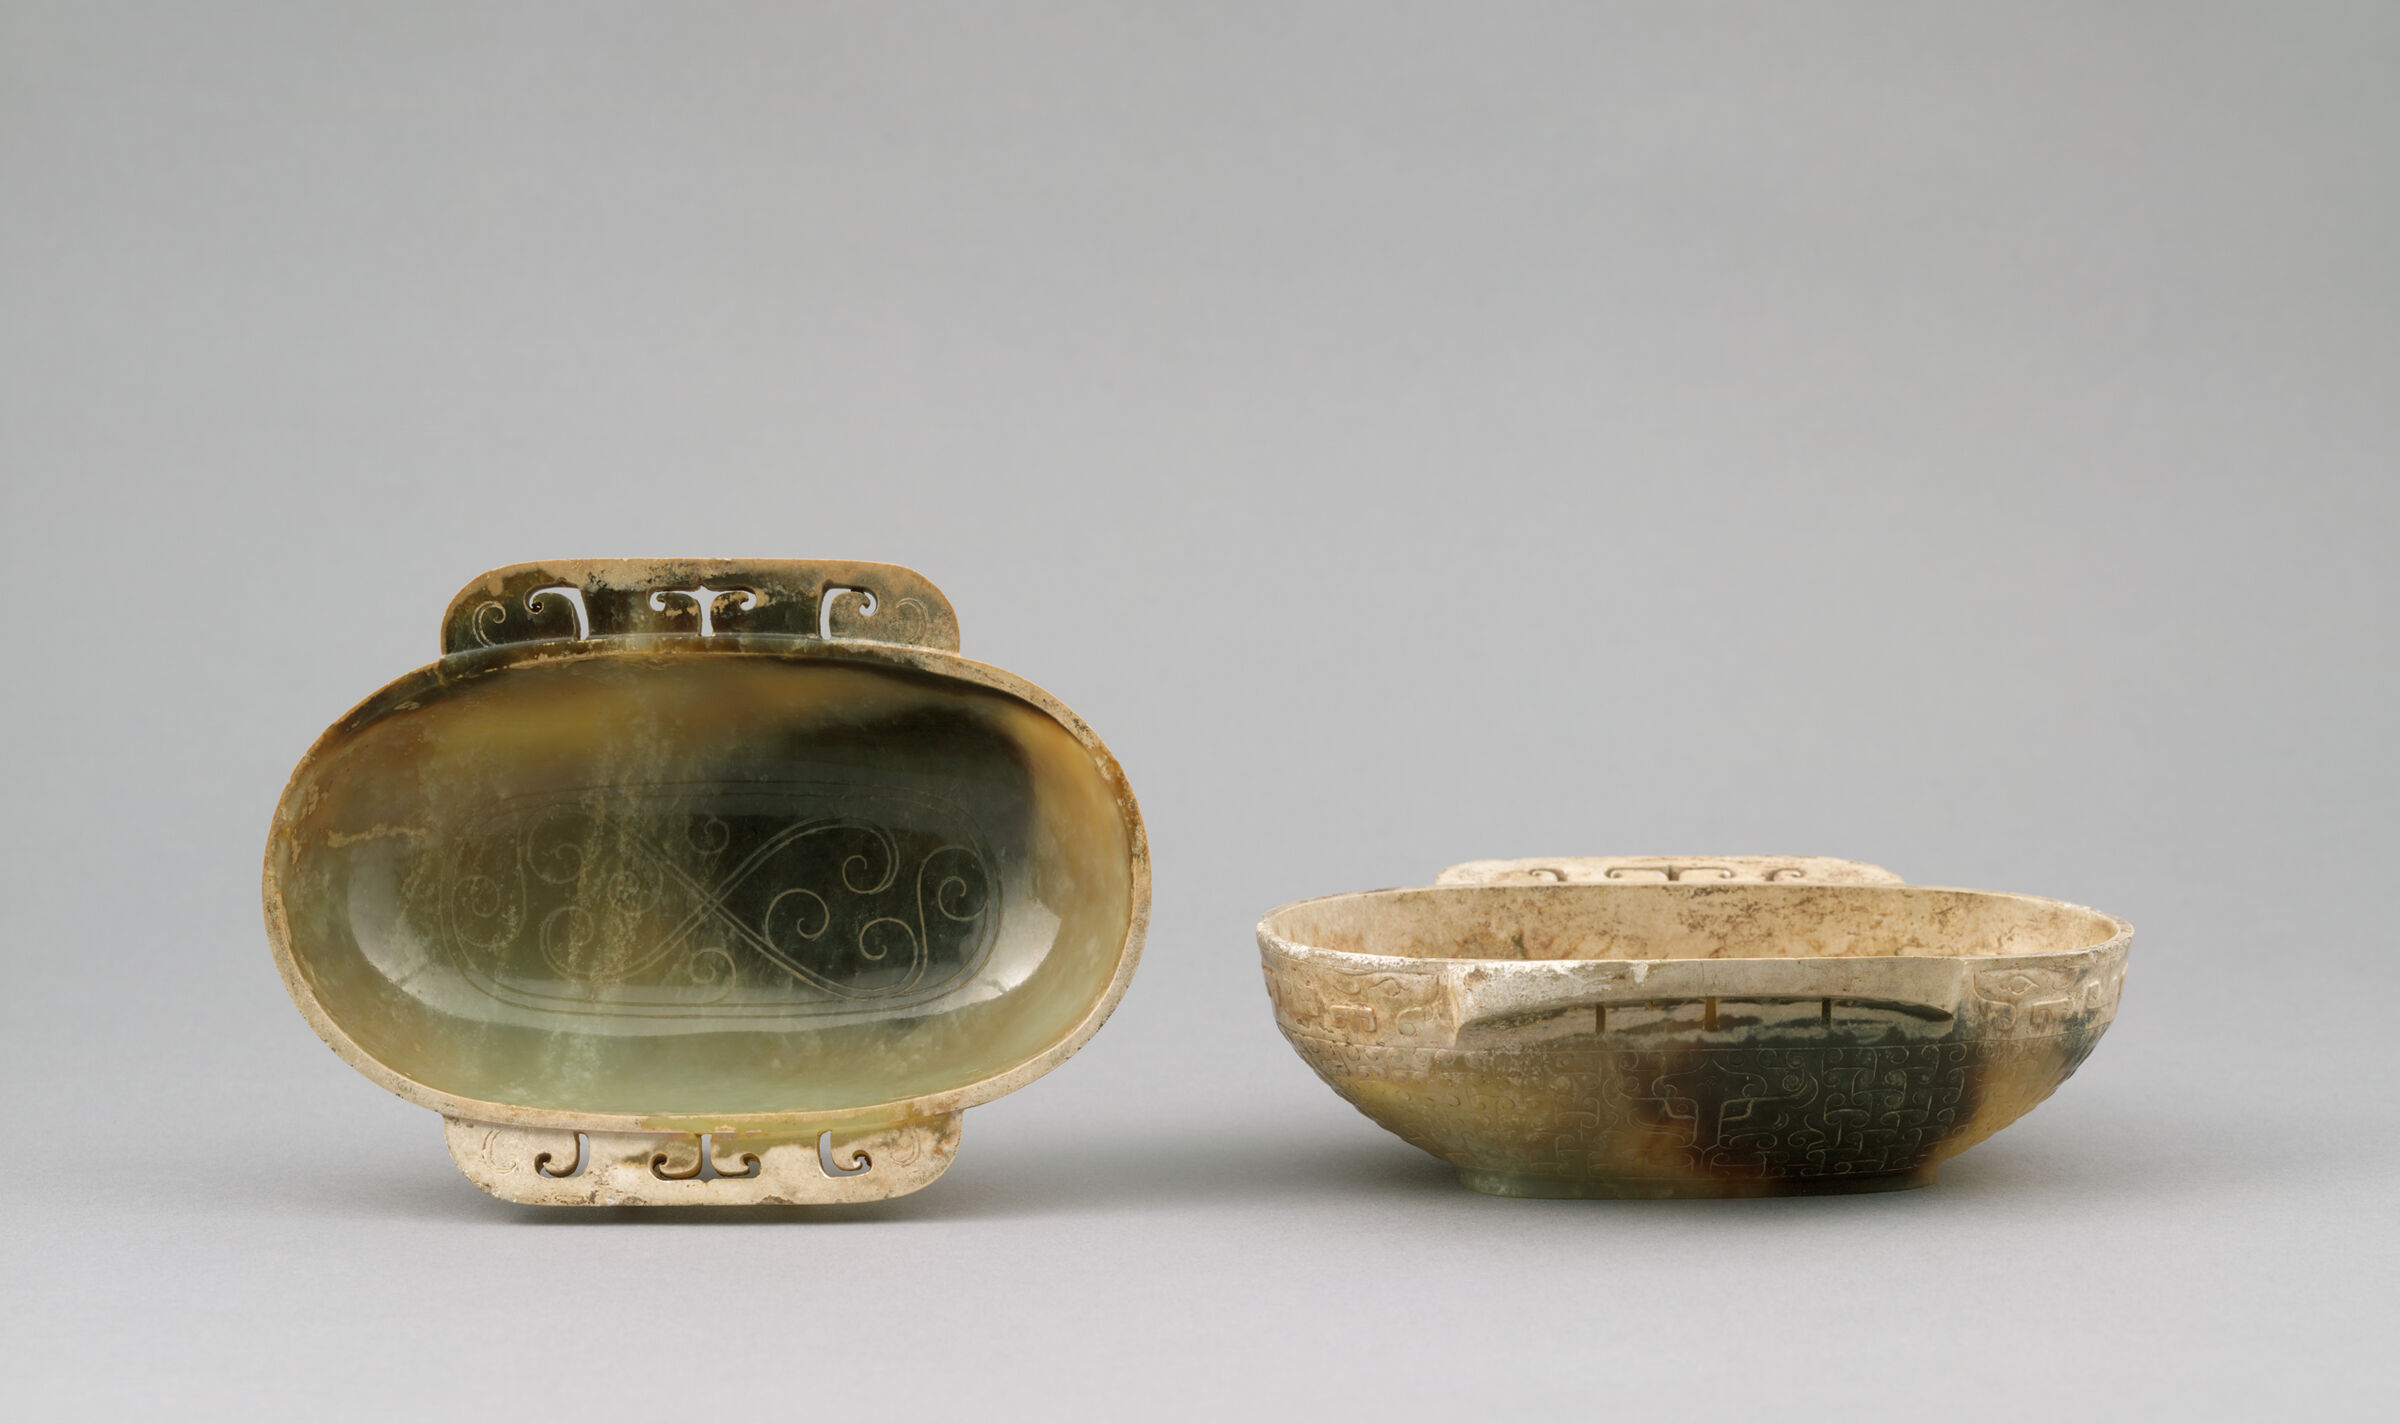 Jade Winged Oval Cup (Erbei), One Of A Pair